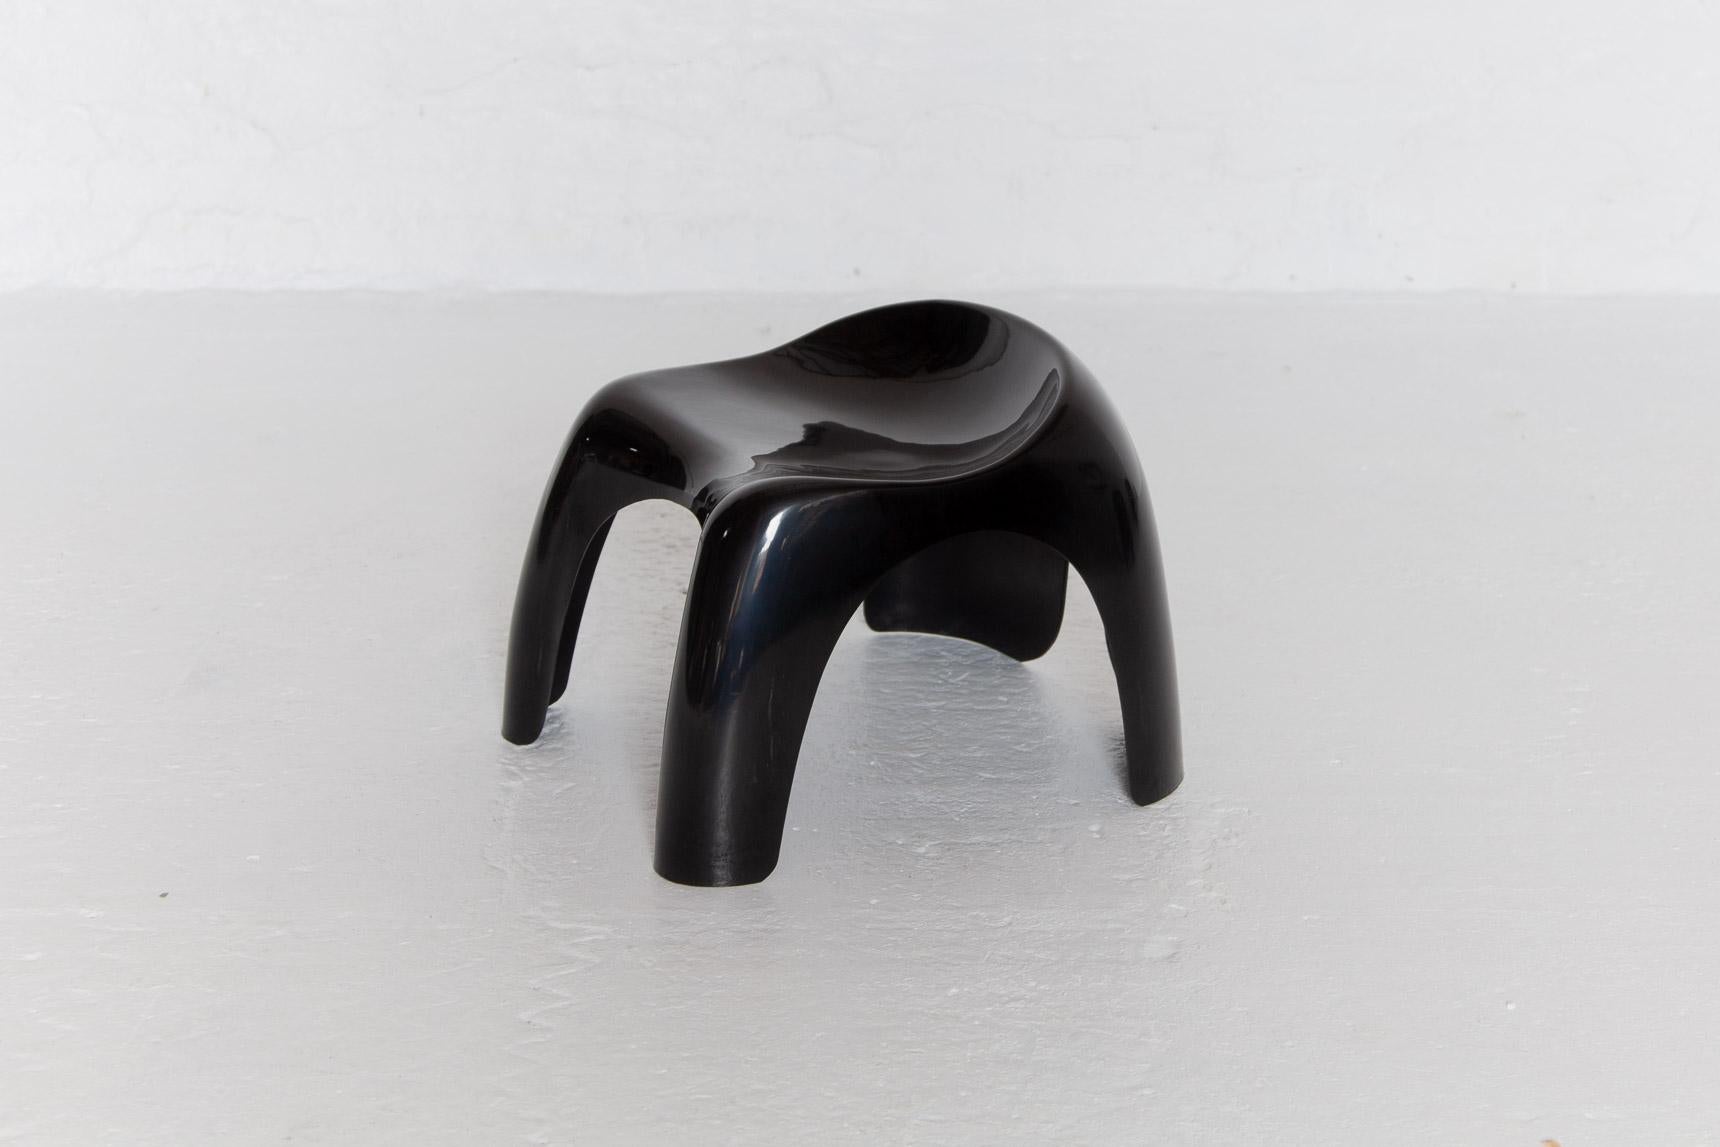 Set of Four Artemide Efebo Efebino Seats designed by Stacy Duke. Beautifully sculptural designed black molded plastic child stools, even for adults, very strong.Stamped label Artemide,Italy.

Dimensions: Height: 12.6 in. (32 cm) Width: 15.36 in.